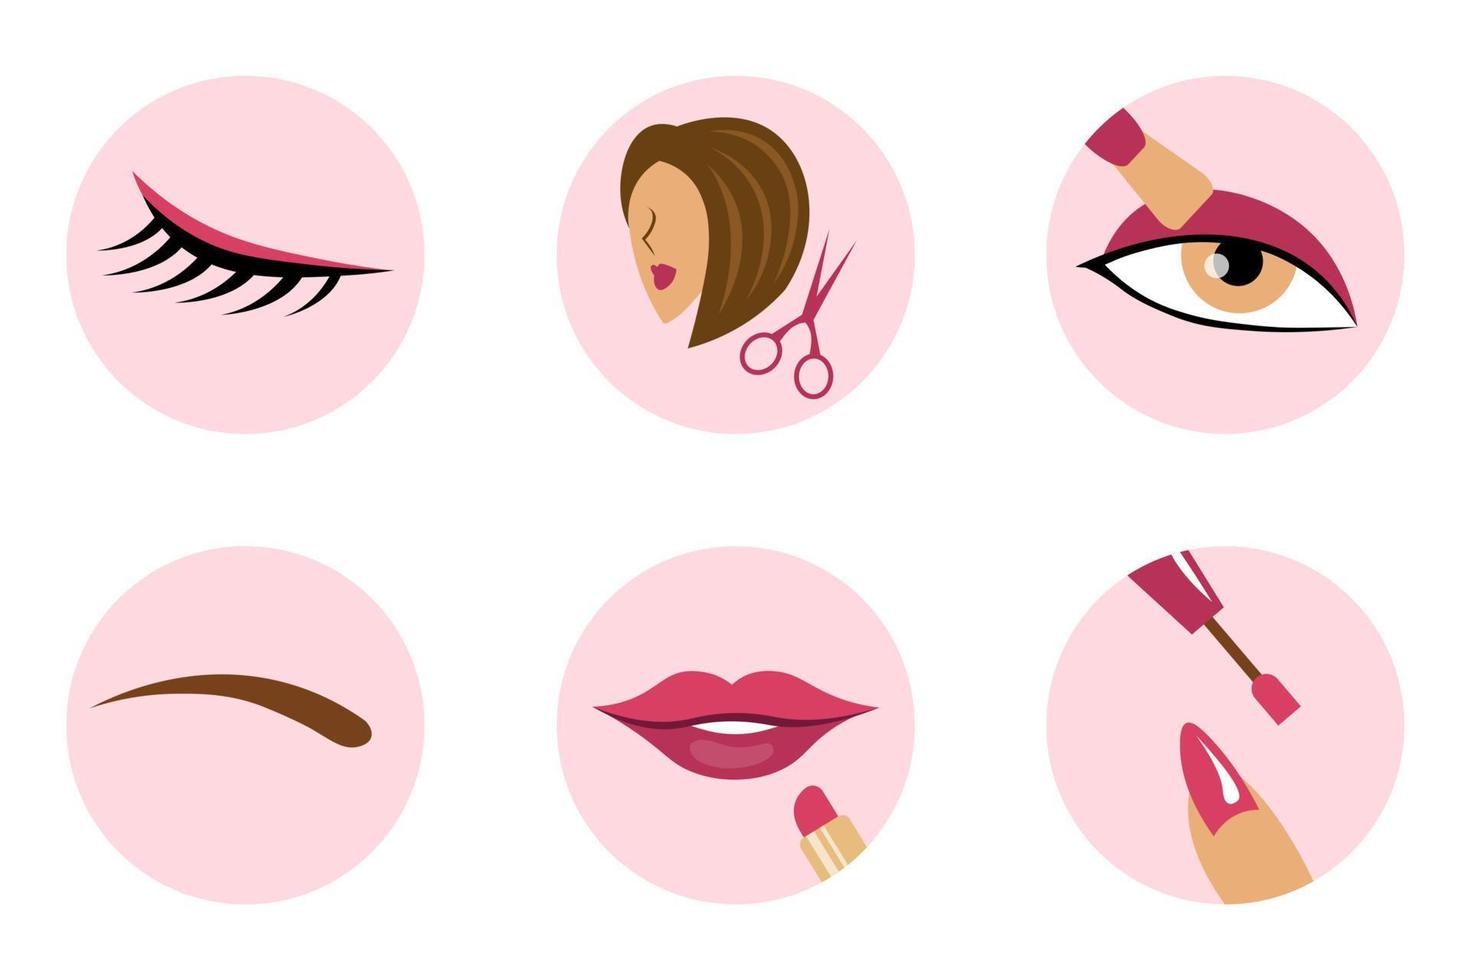 Beauty salon icons vector illustration. Lips, eyebrows, eye make up, nails, hair, manicure and eyelashes. Beauty salon logos isolated. Icons for instagram stories. Pink color social media icons set.